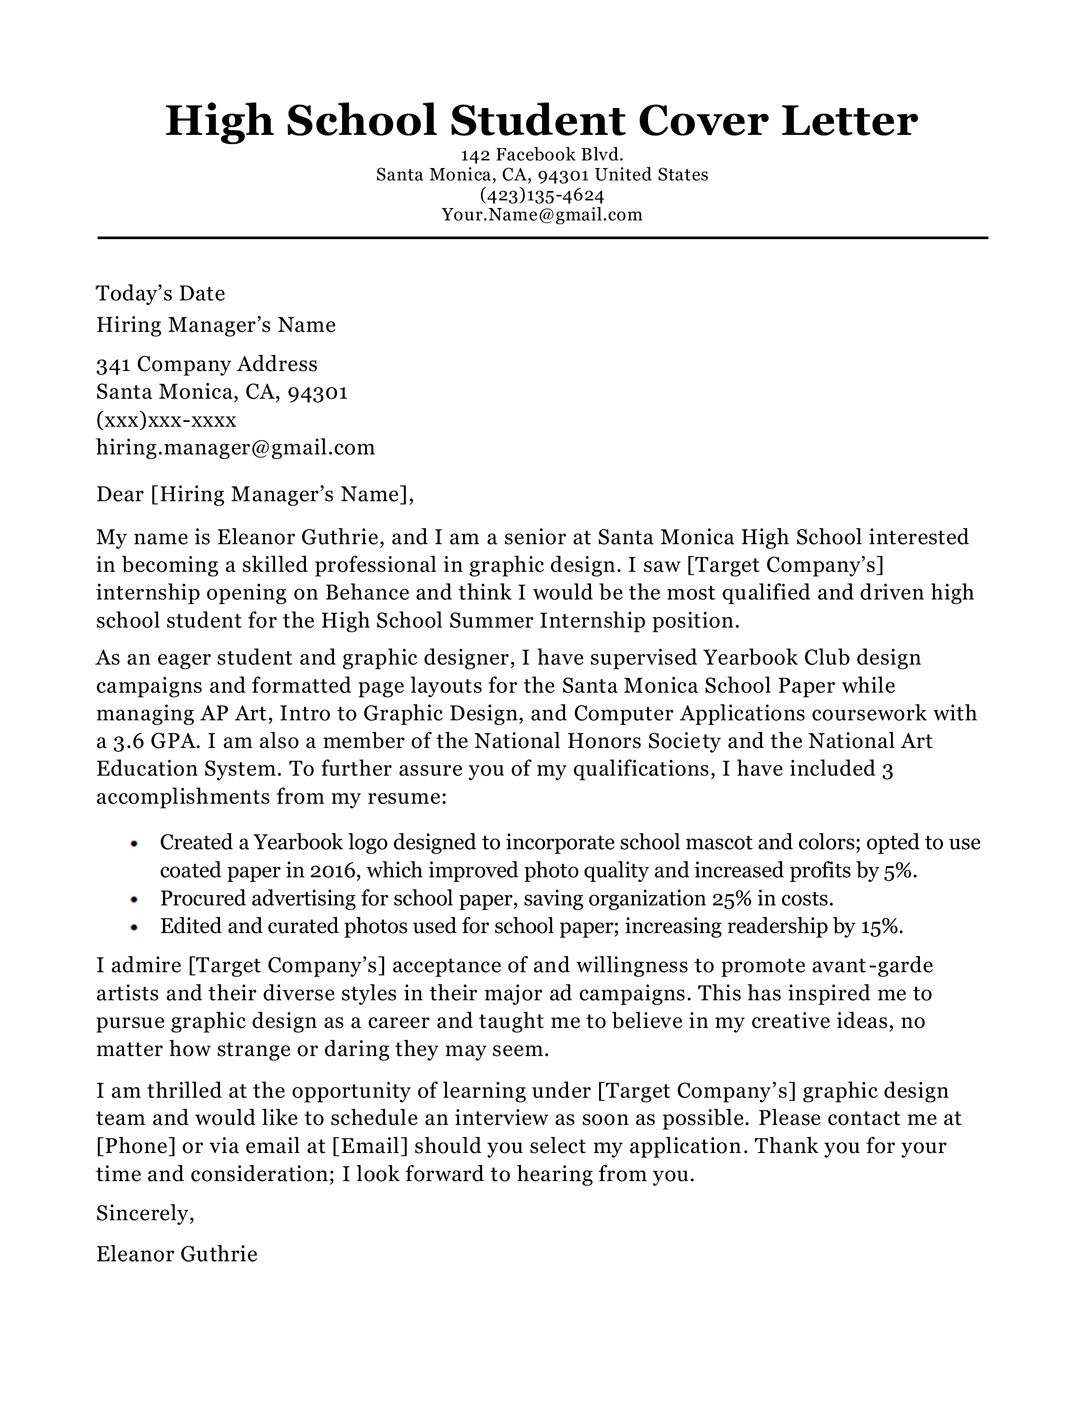 Admissions Counselor Cover Letter No Experience from resumecompanion.com